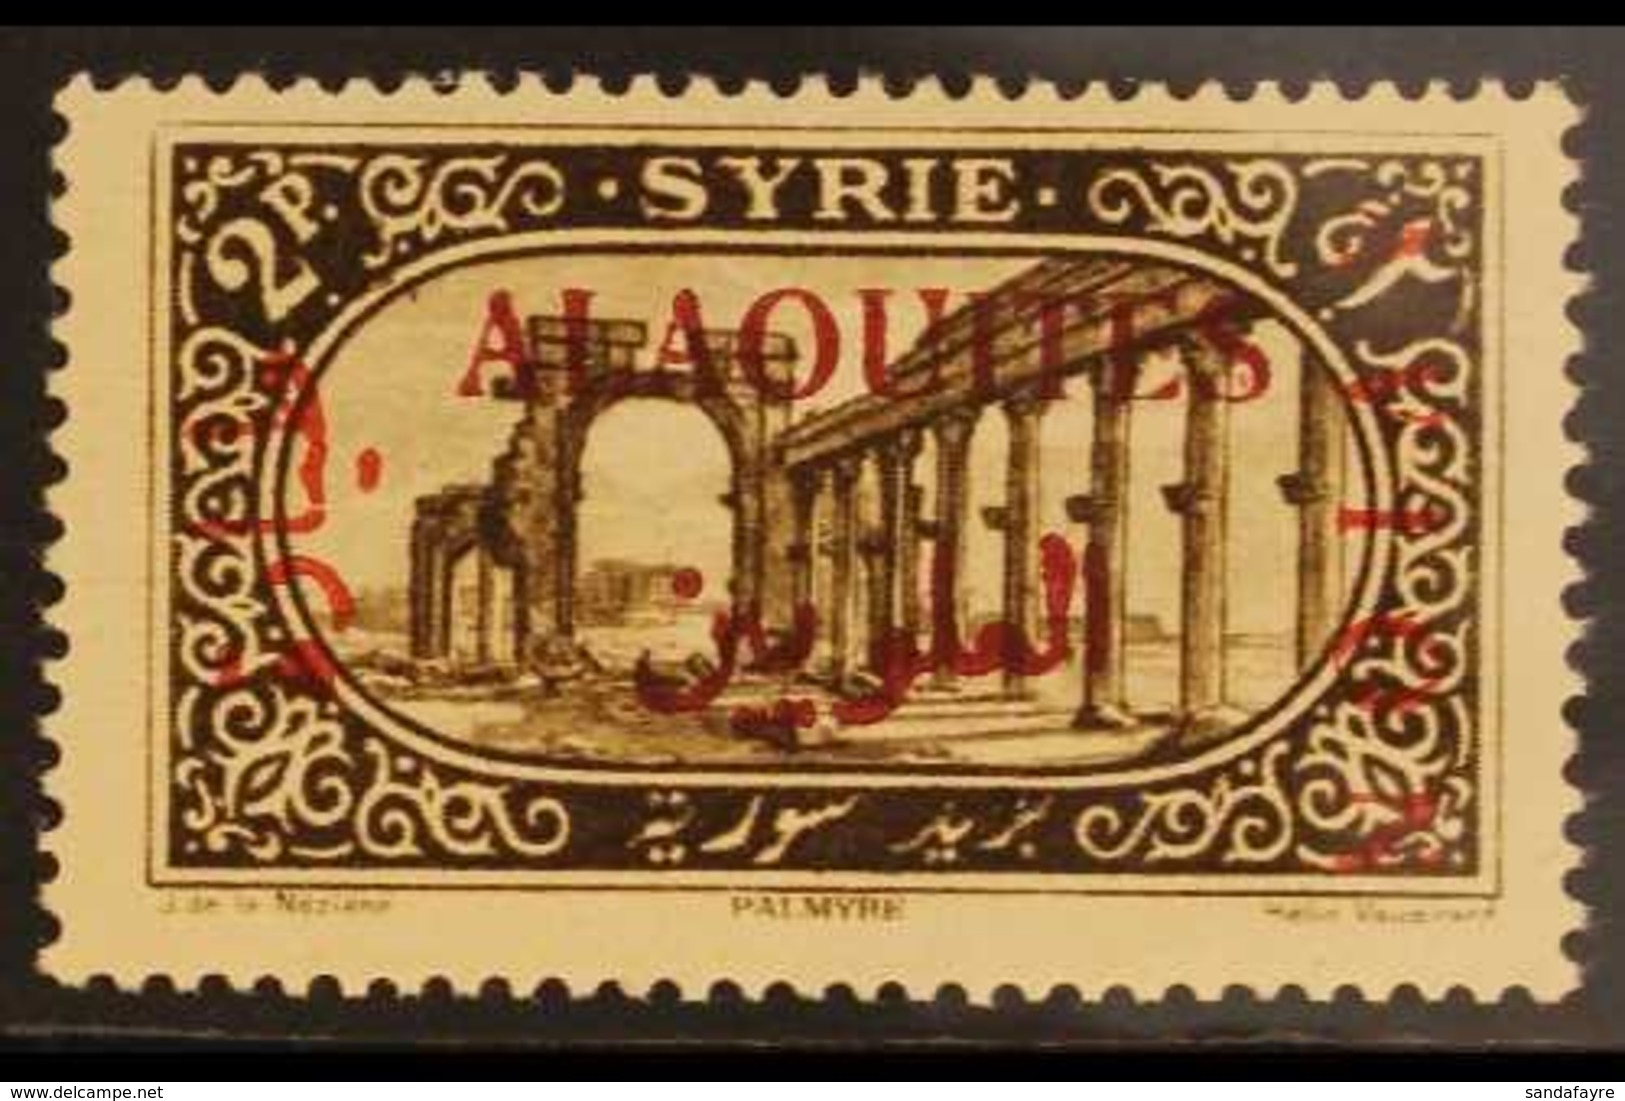 ALAOUITES 1925 2p Sepia Airmail Ovptd In RED, Variety "surcharge Reversed" (Avion At Right), Yv PA5 Var, Vf Never Hinged - Syrie